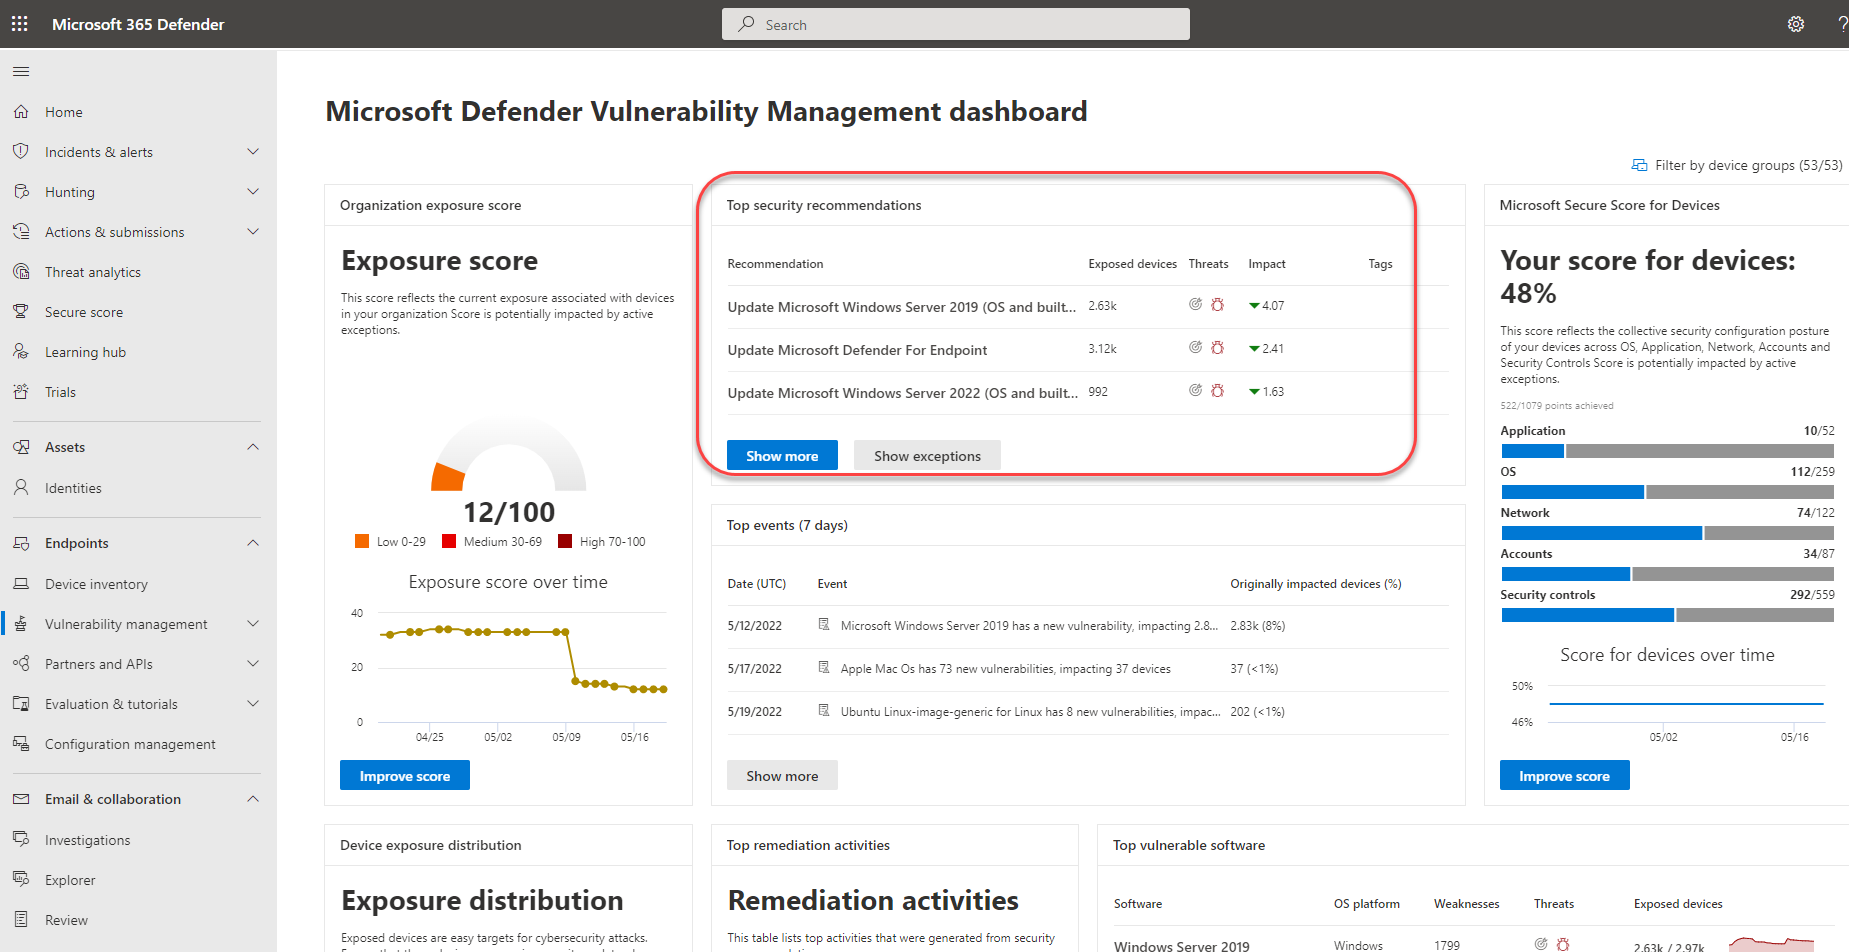 Screenshot of the vulnerability management dashboard with security recommendations highlighted.